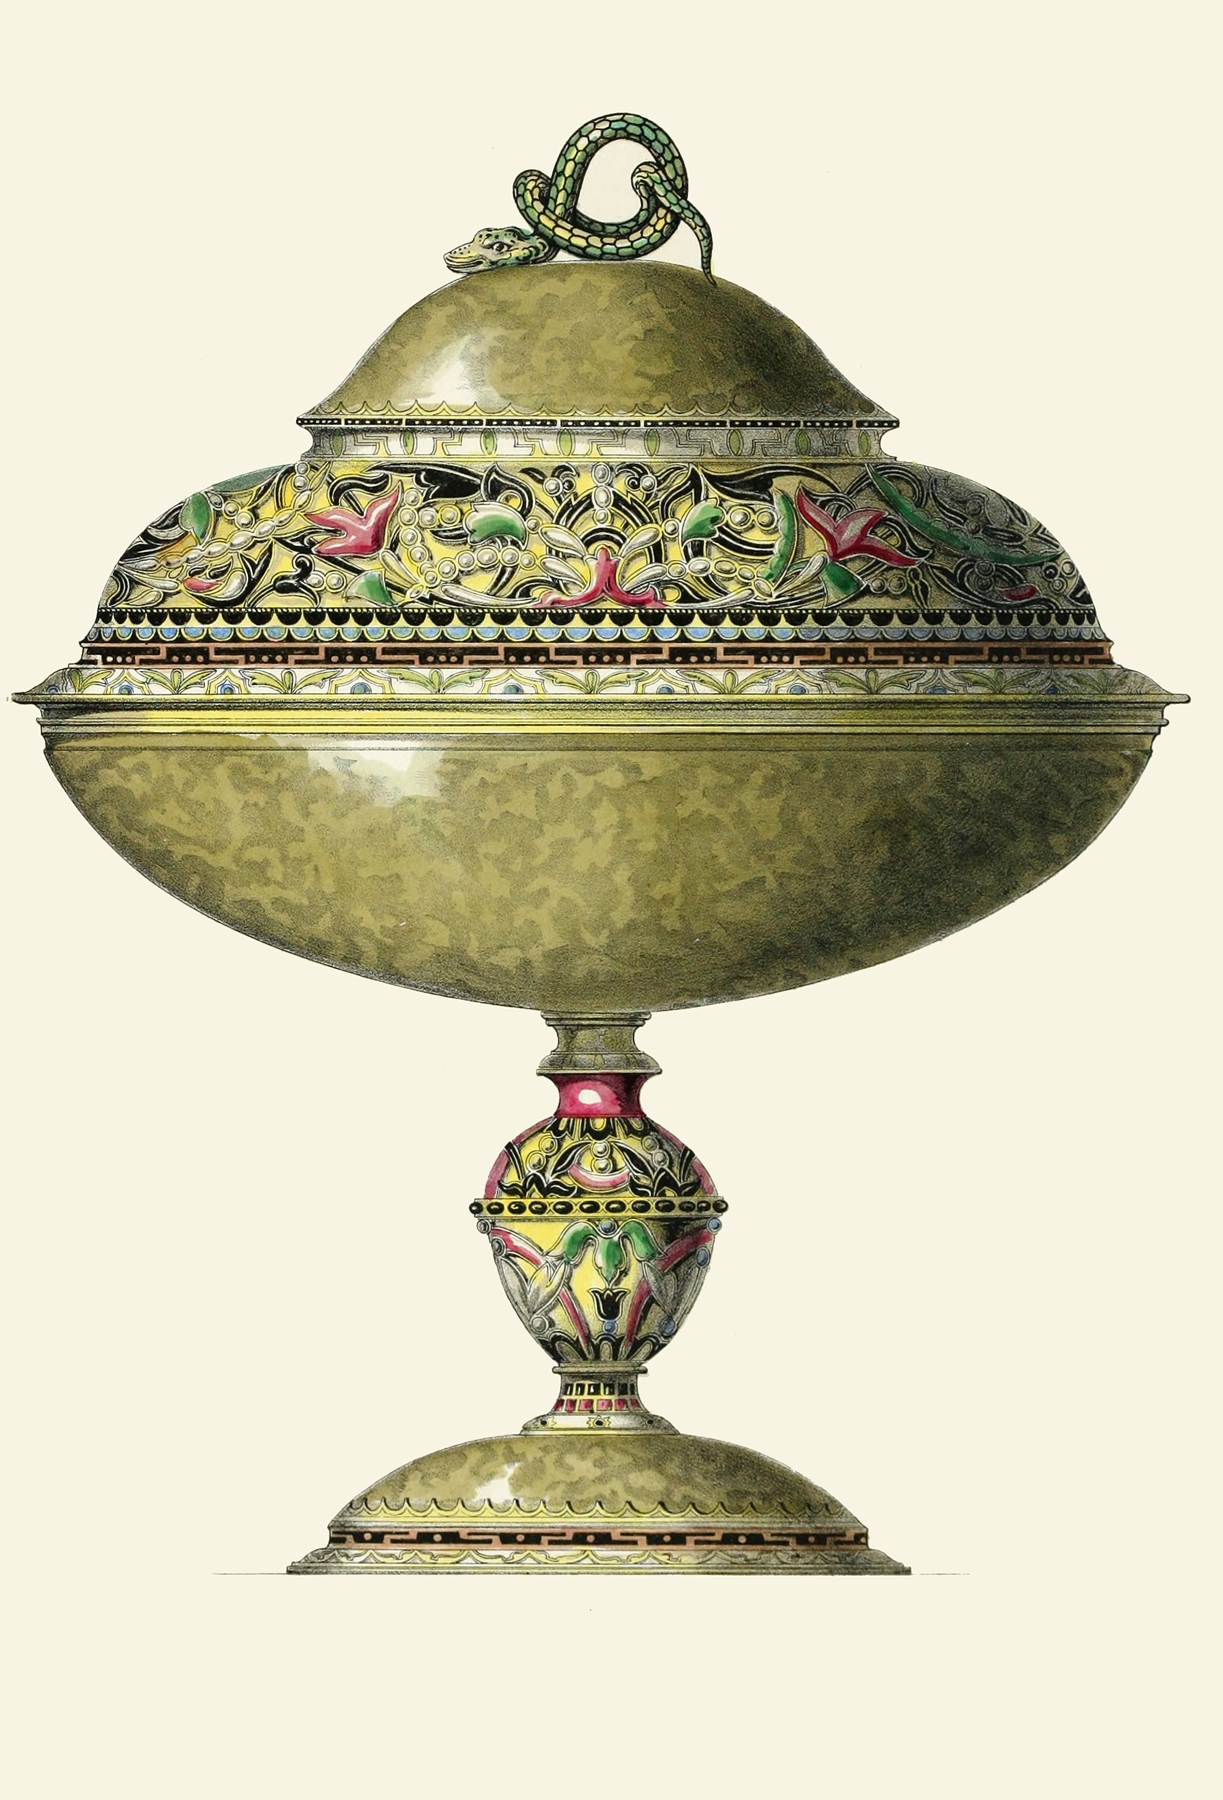 A Russian Vase enriched with Enamel 썸네일